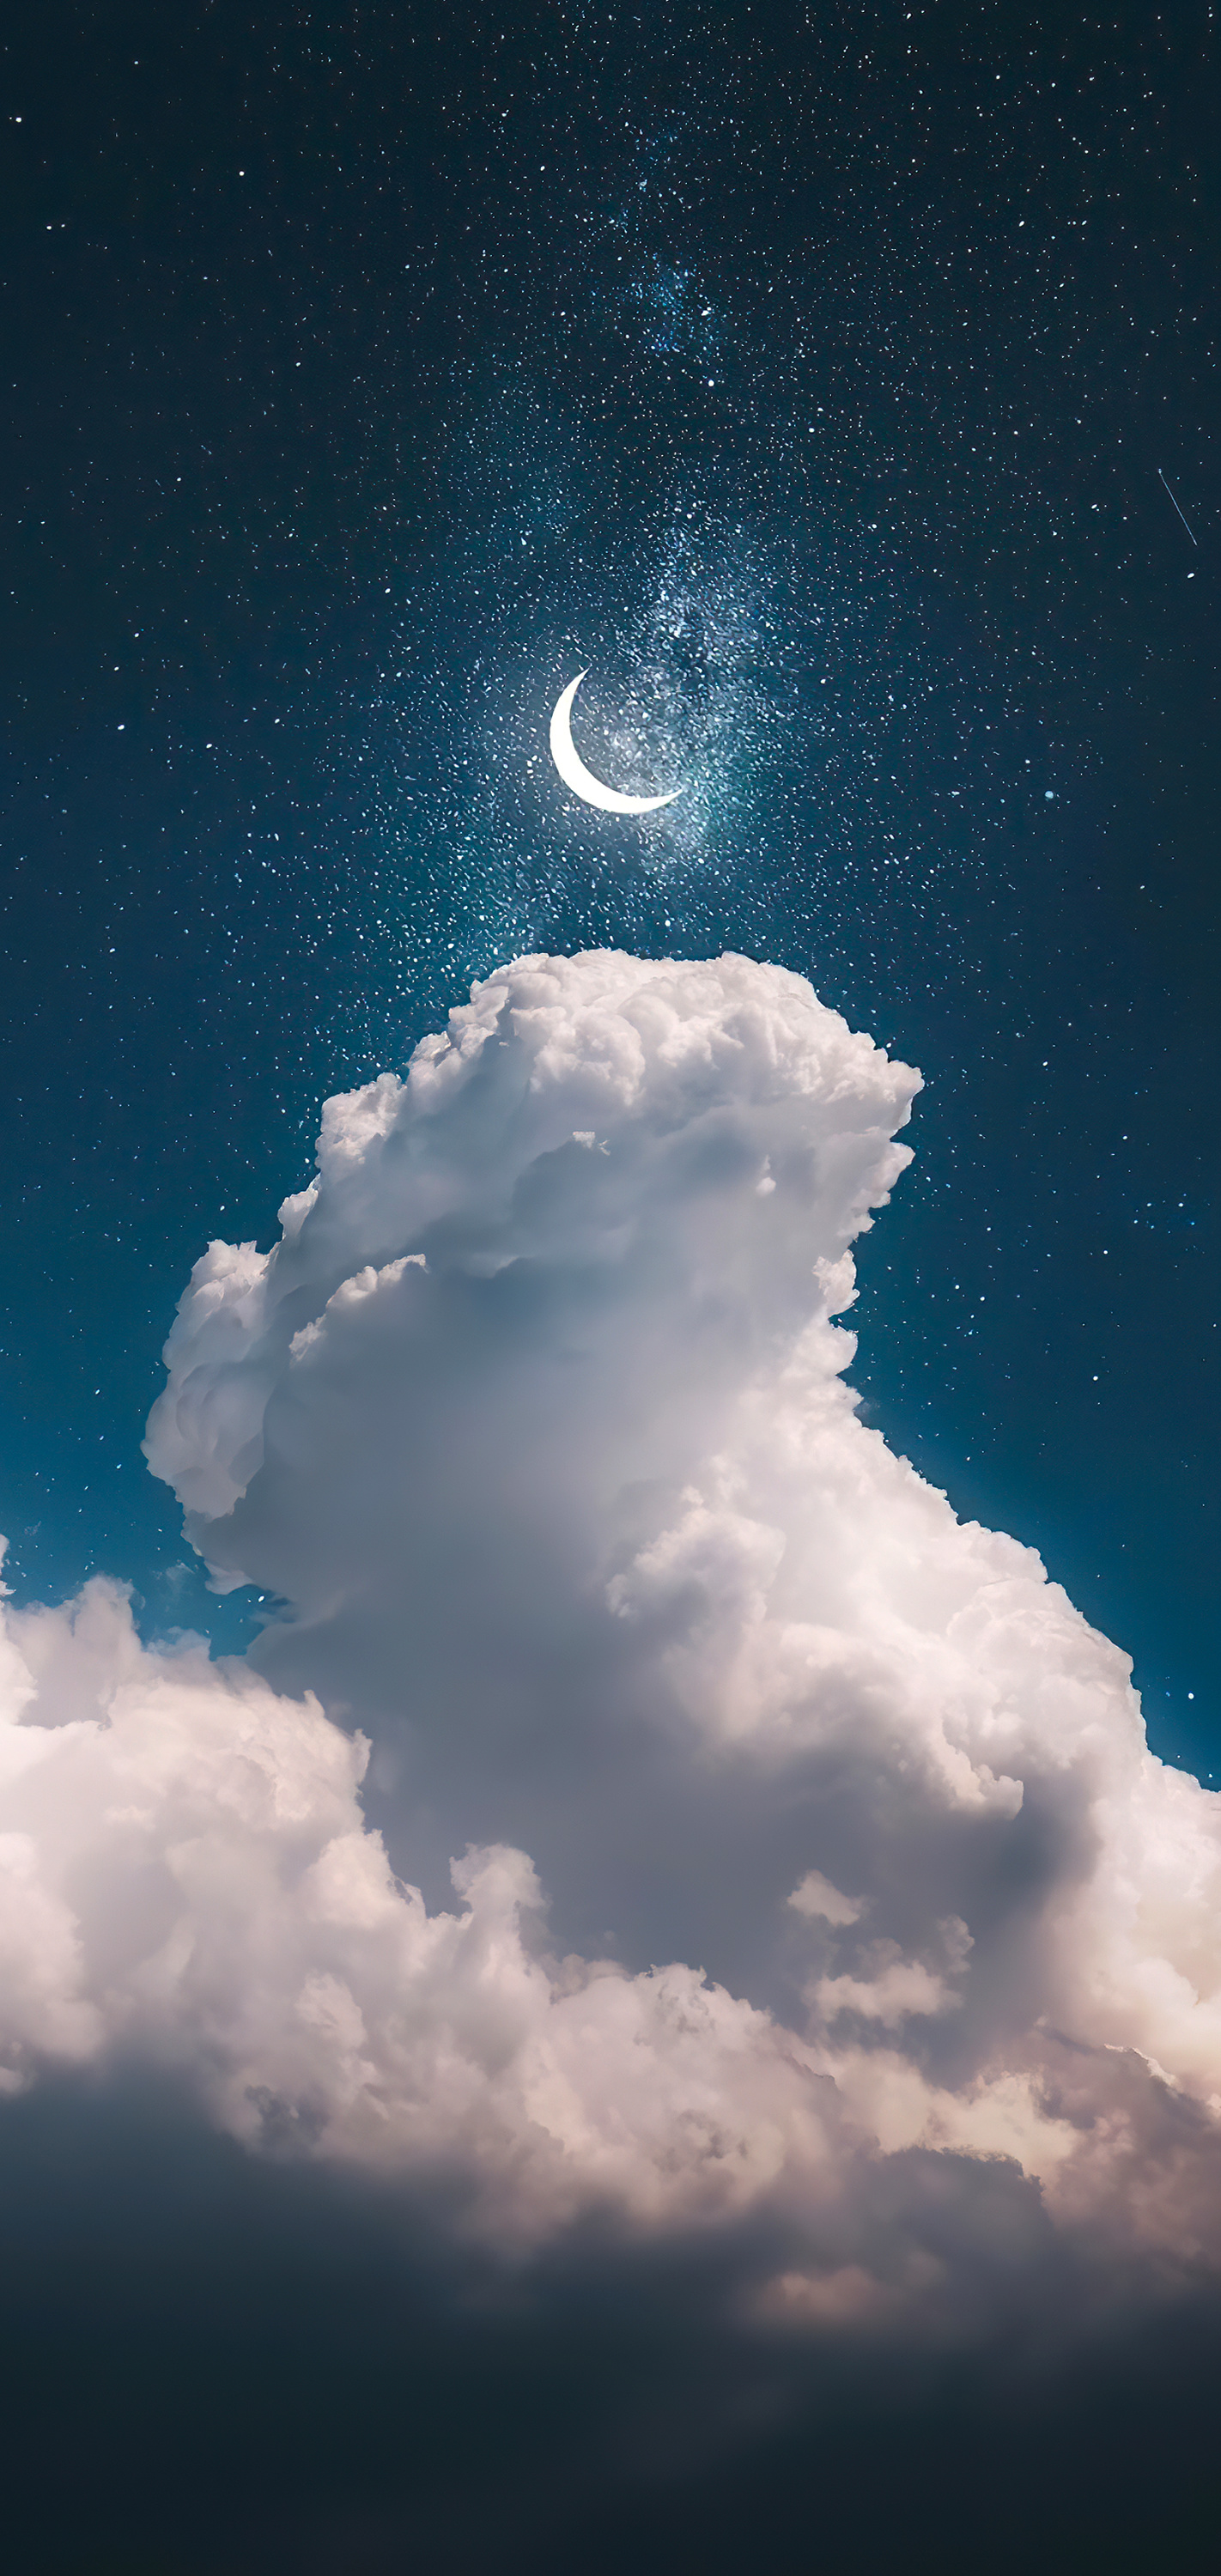 5 beautiful night sky wallpapers for iPhone to download